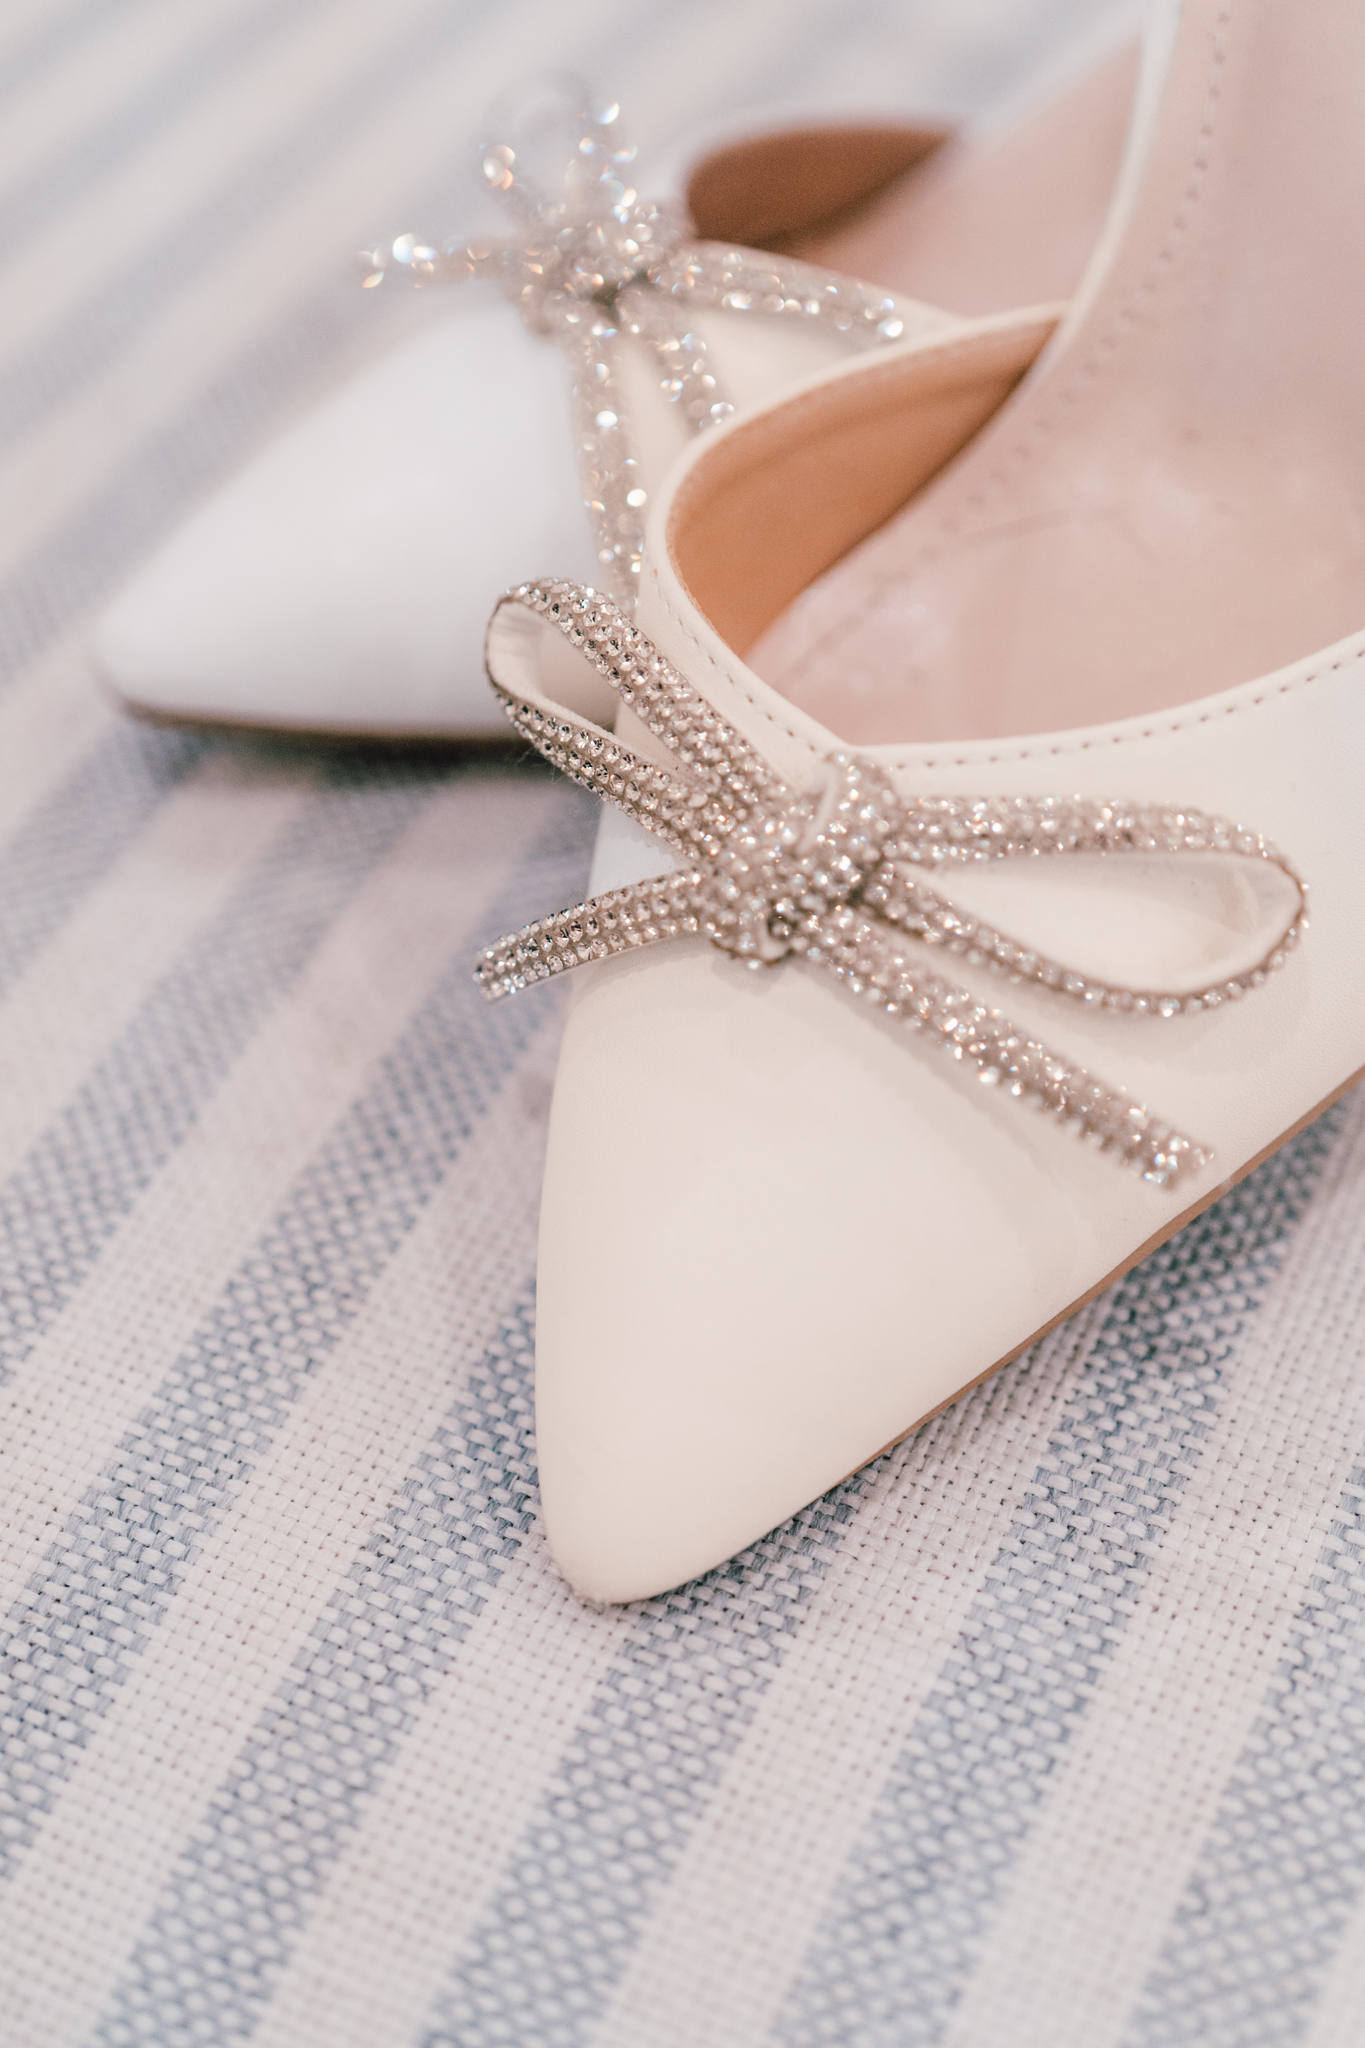 Attention to the small beautiful details of your wedding from head to toe like these classy and timeless additions. Sparkle bride shoes elegant classy bridal glamour bride style #bridaldetails #weddingshoes #smallweddingdetails #brideshoes #weddingattire